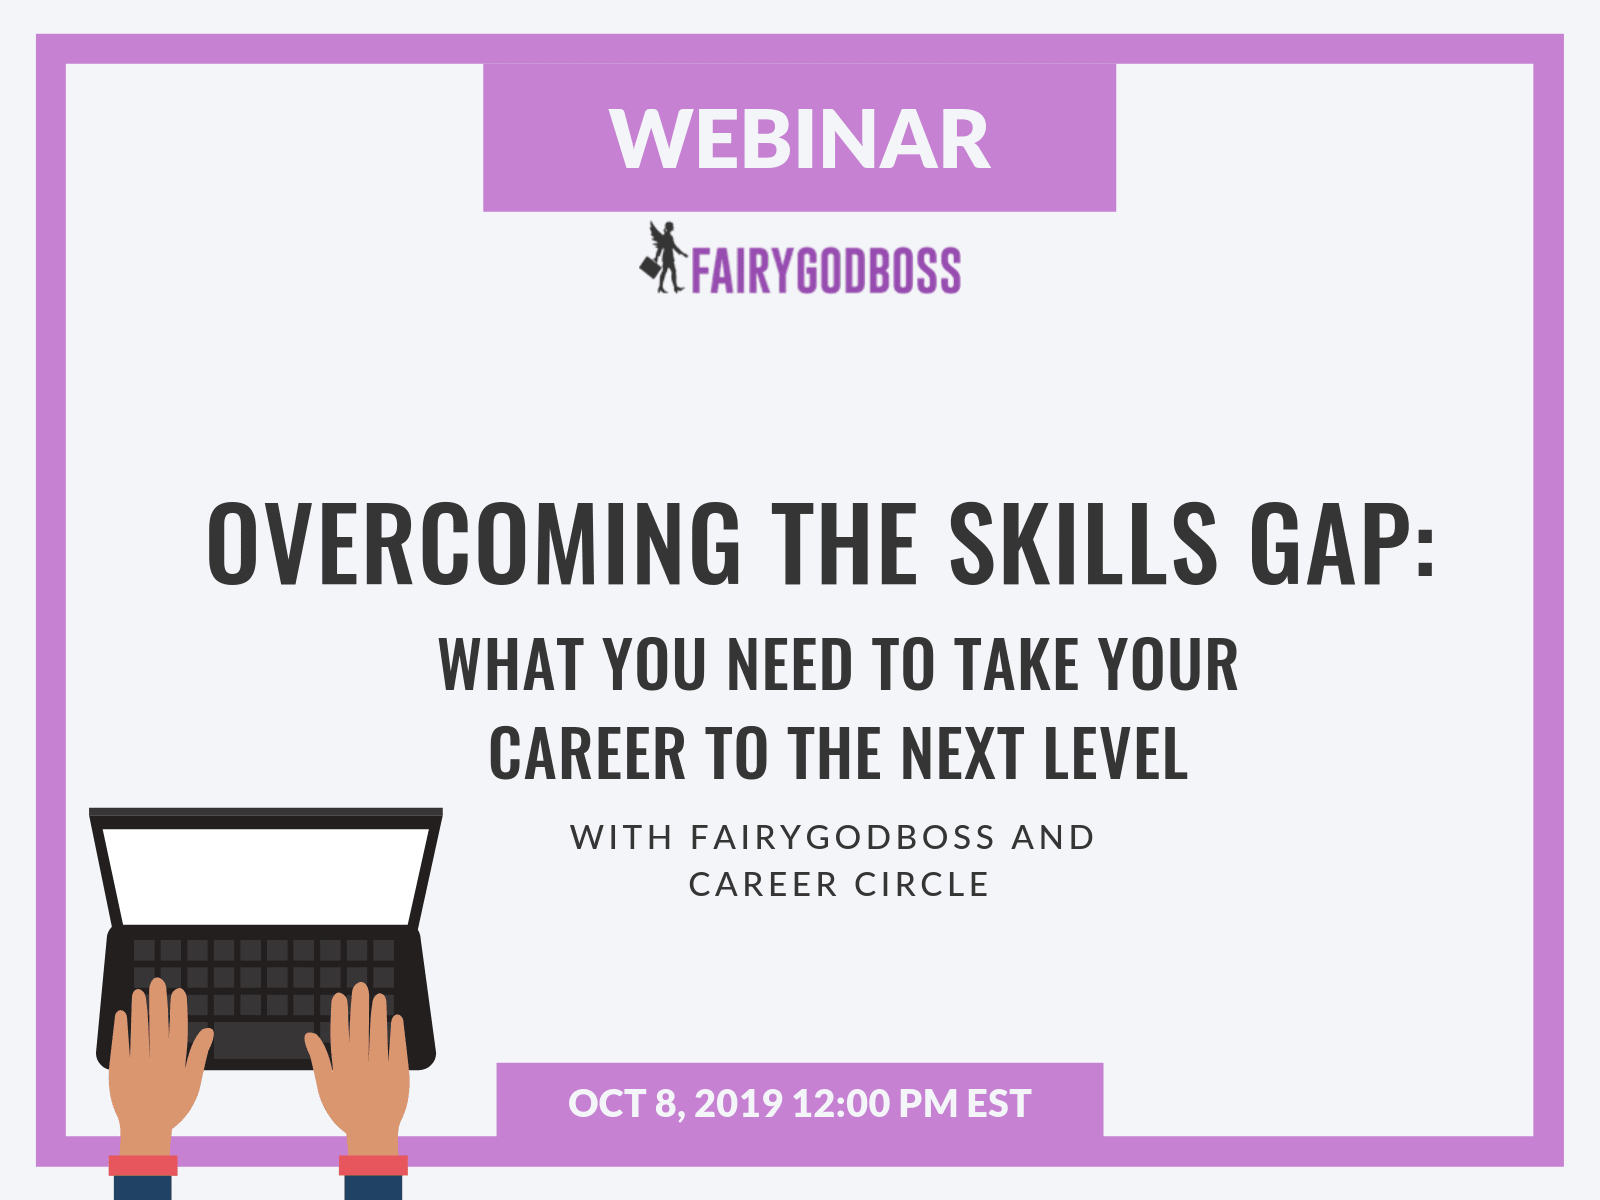 Overcoming the Skills Gap: What You Need to Take Your Career to the Next Level